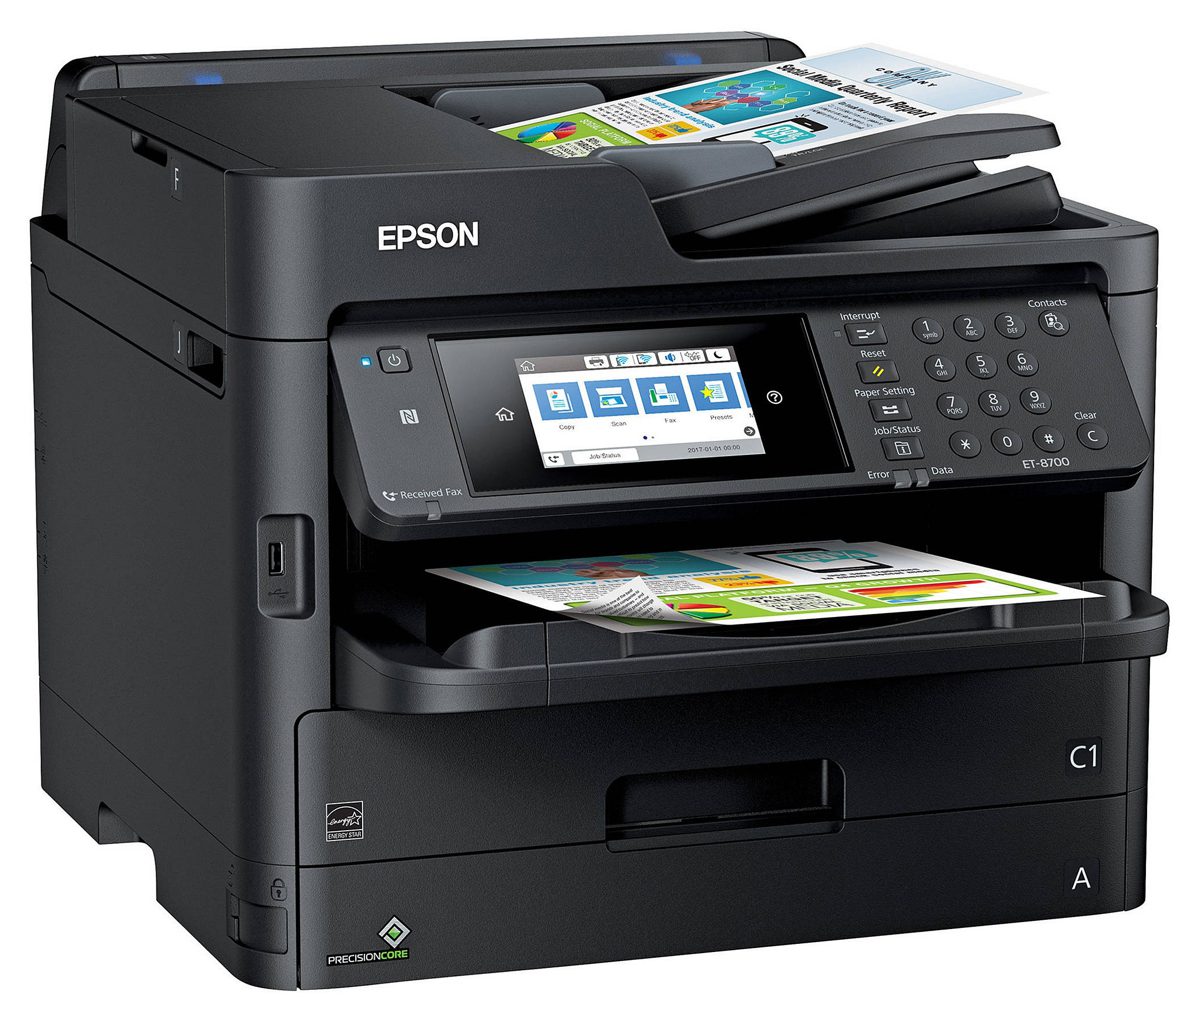 Epson ET-2650 Resetter Free Download – Unlock the Full Potential of Your Printer